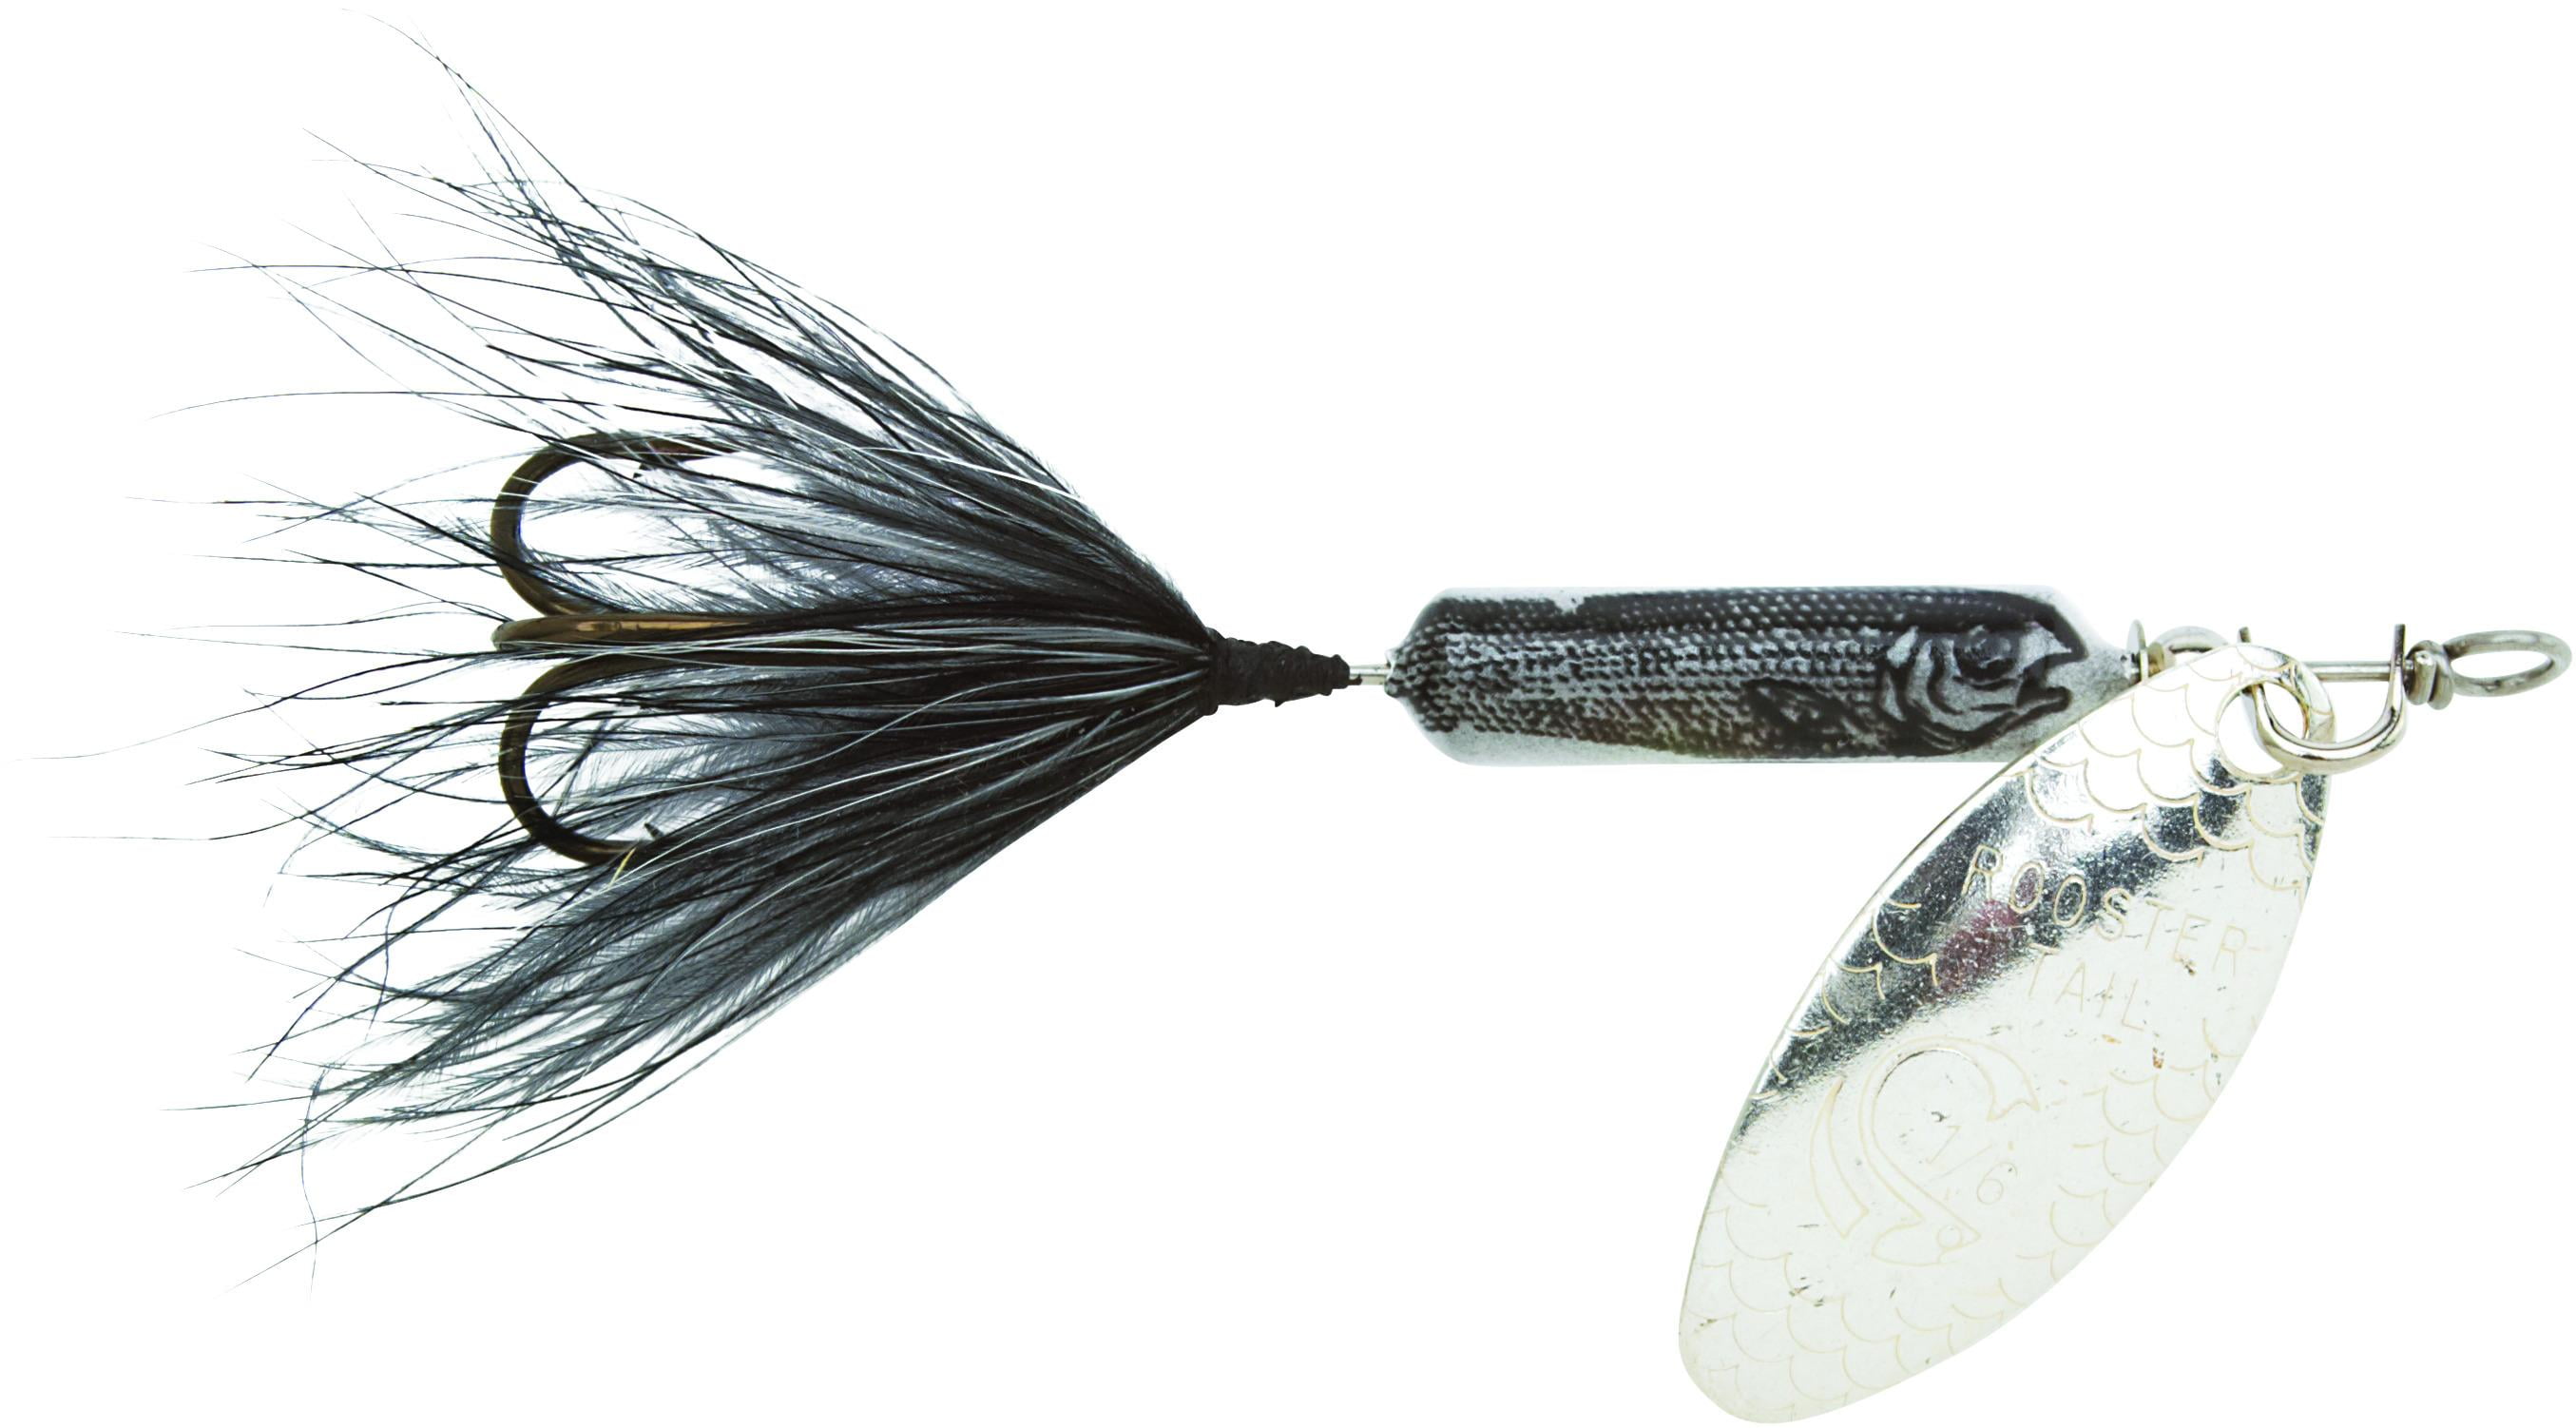 Yakima Bait Worden's Original Rooster Tail Lure, Silver Shad, 1/8